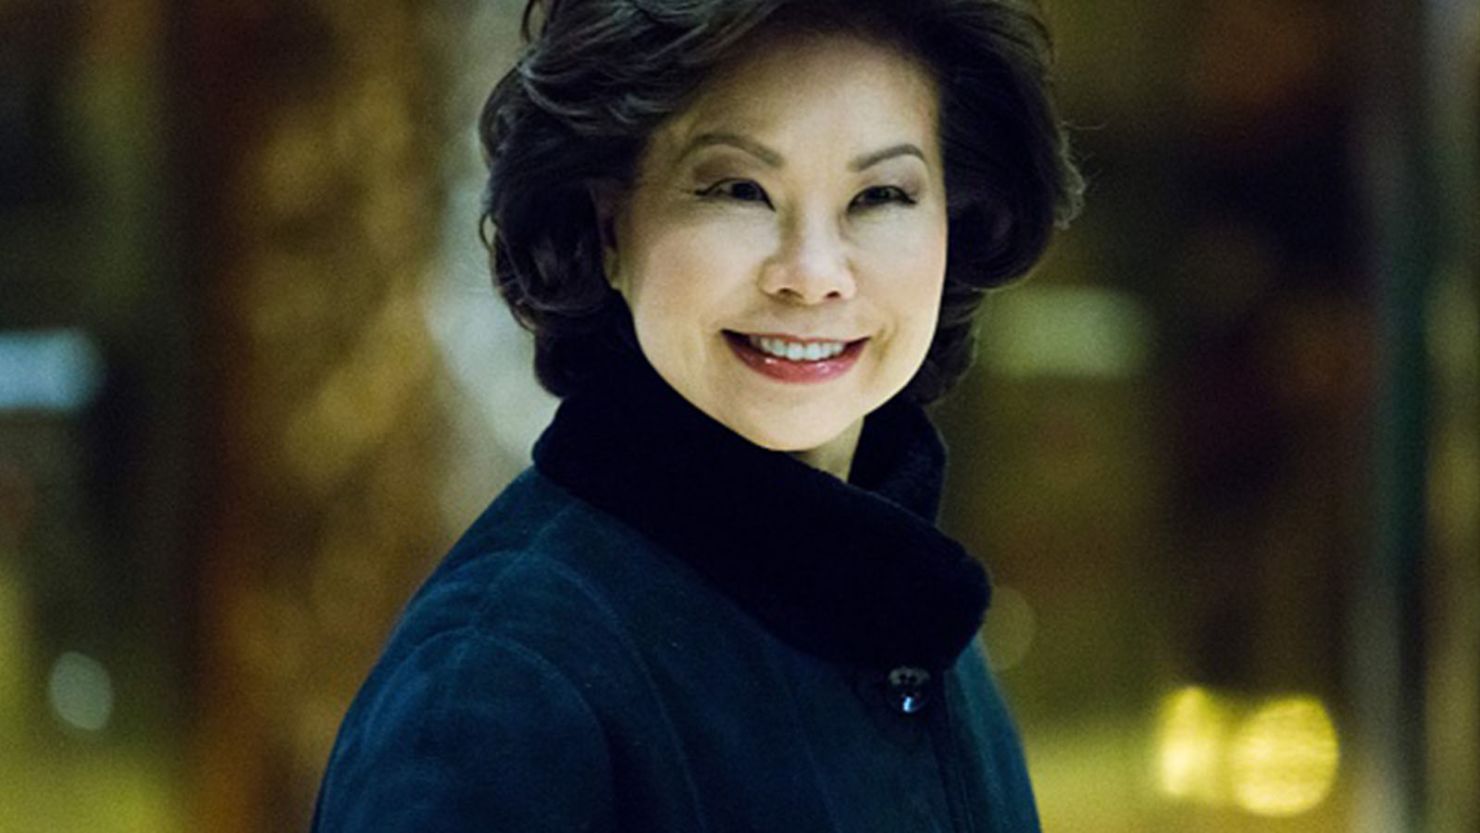 Elaine Chao arrives at Trump Tower on November 21, 2016 in New York.